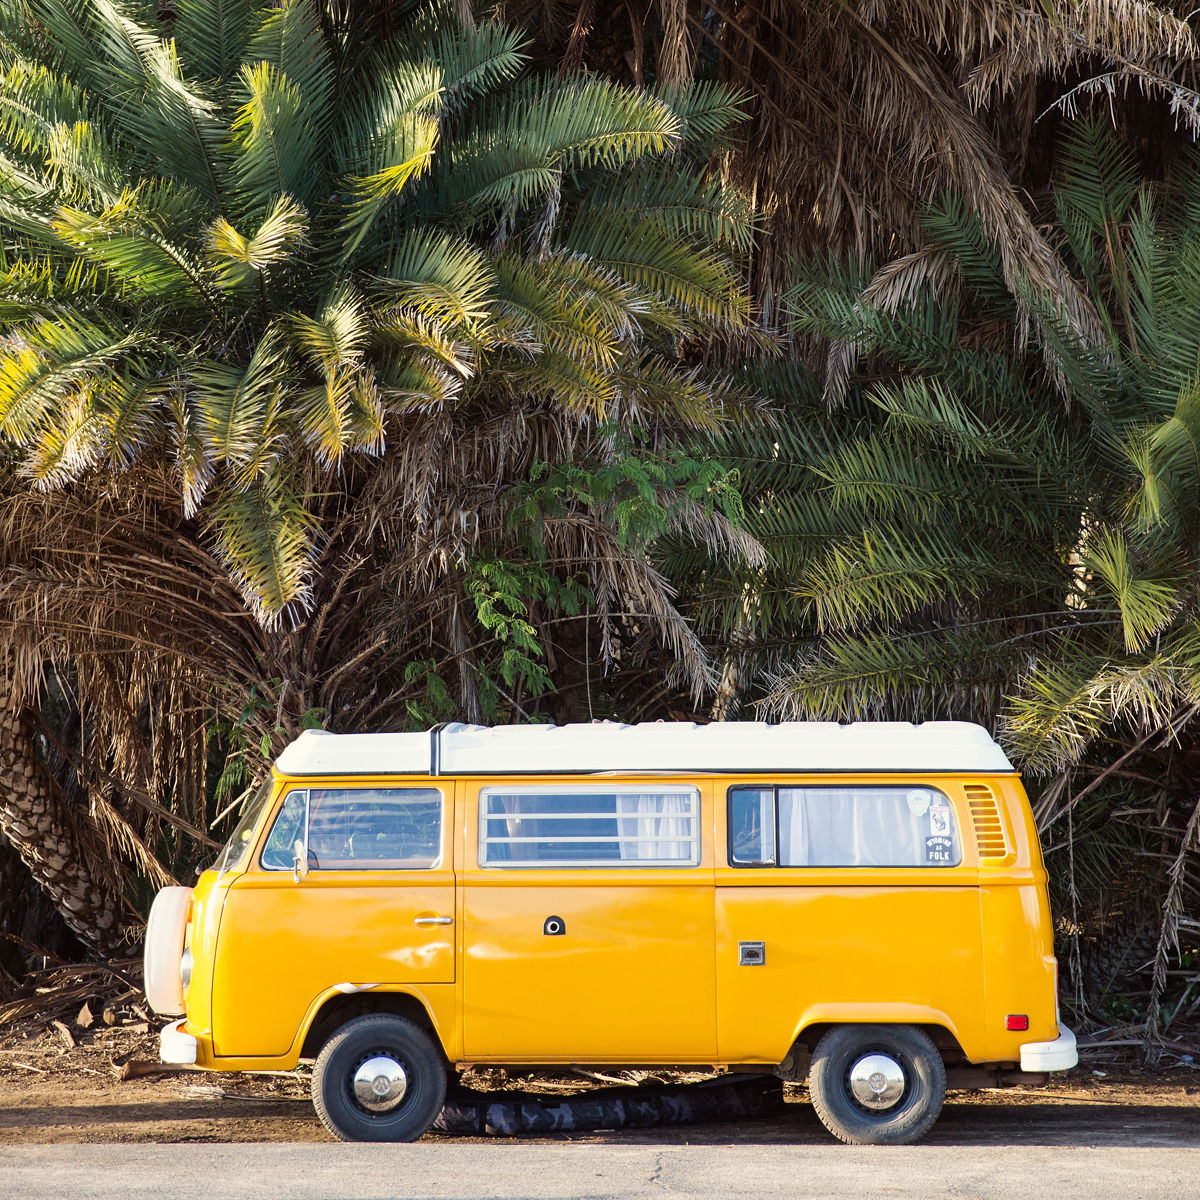 10 Great Questions to Ask on a Road Trip